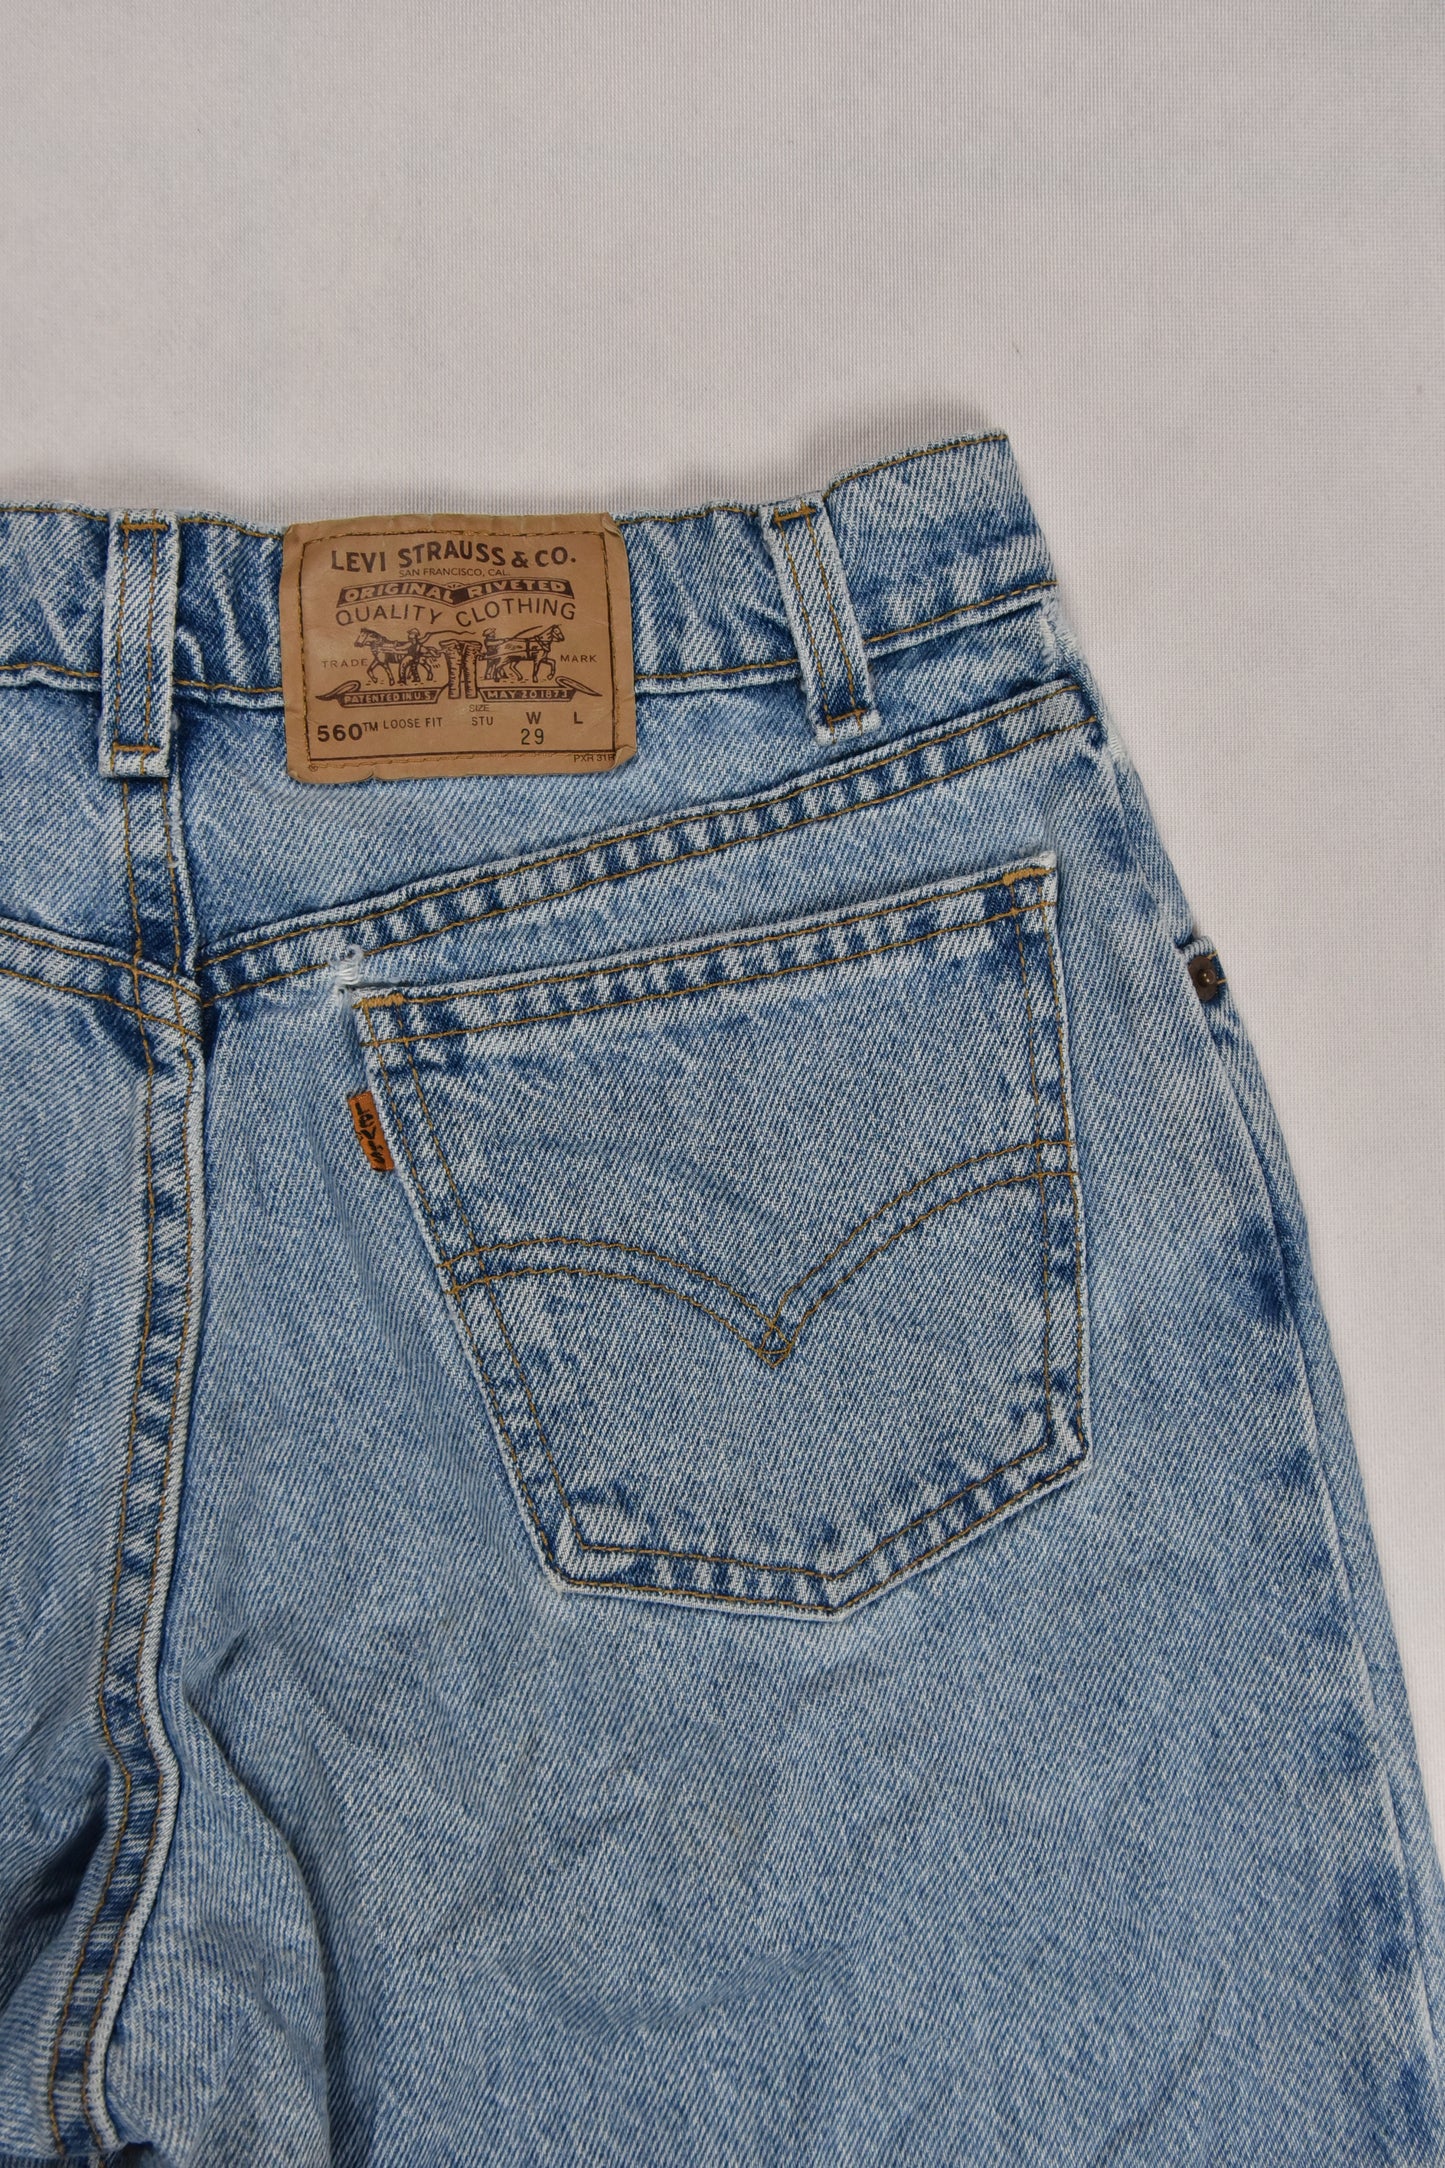 Jeans Levi's 560 Orange Tab Cropped Made in USA Vintage / 29